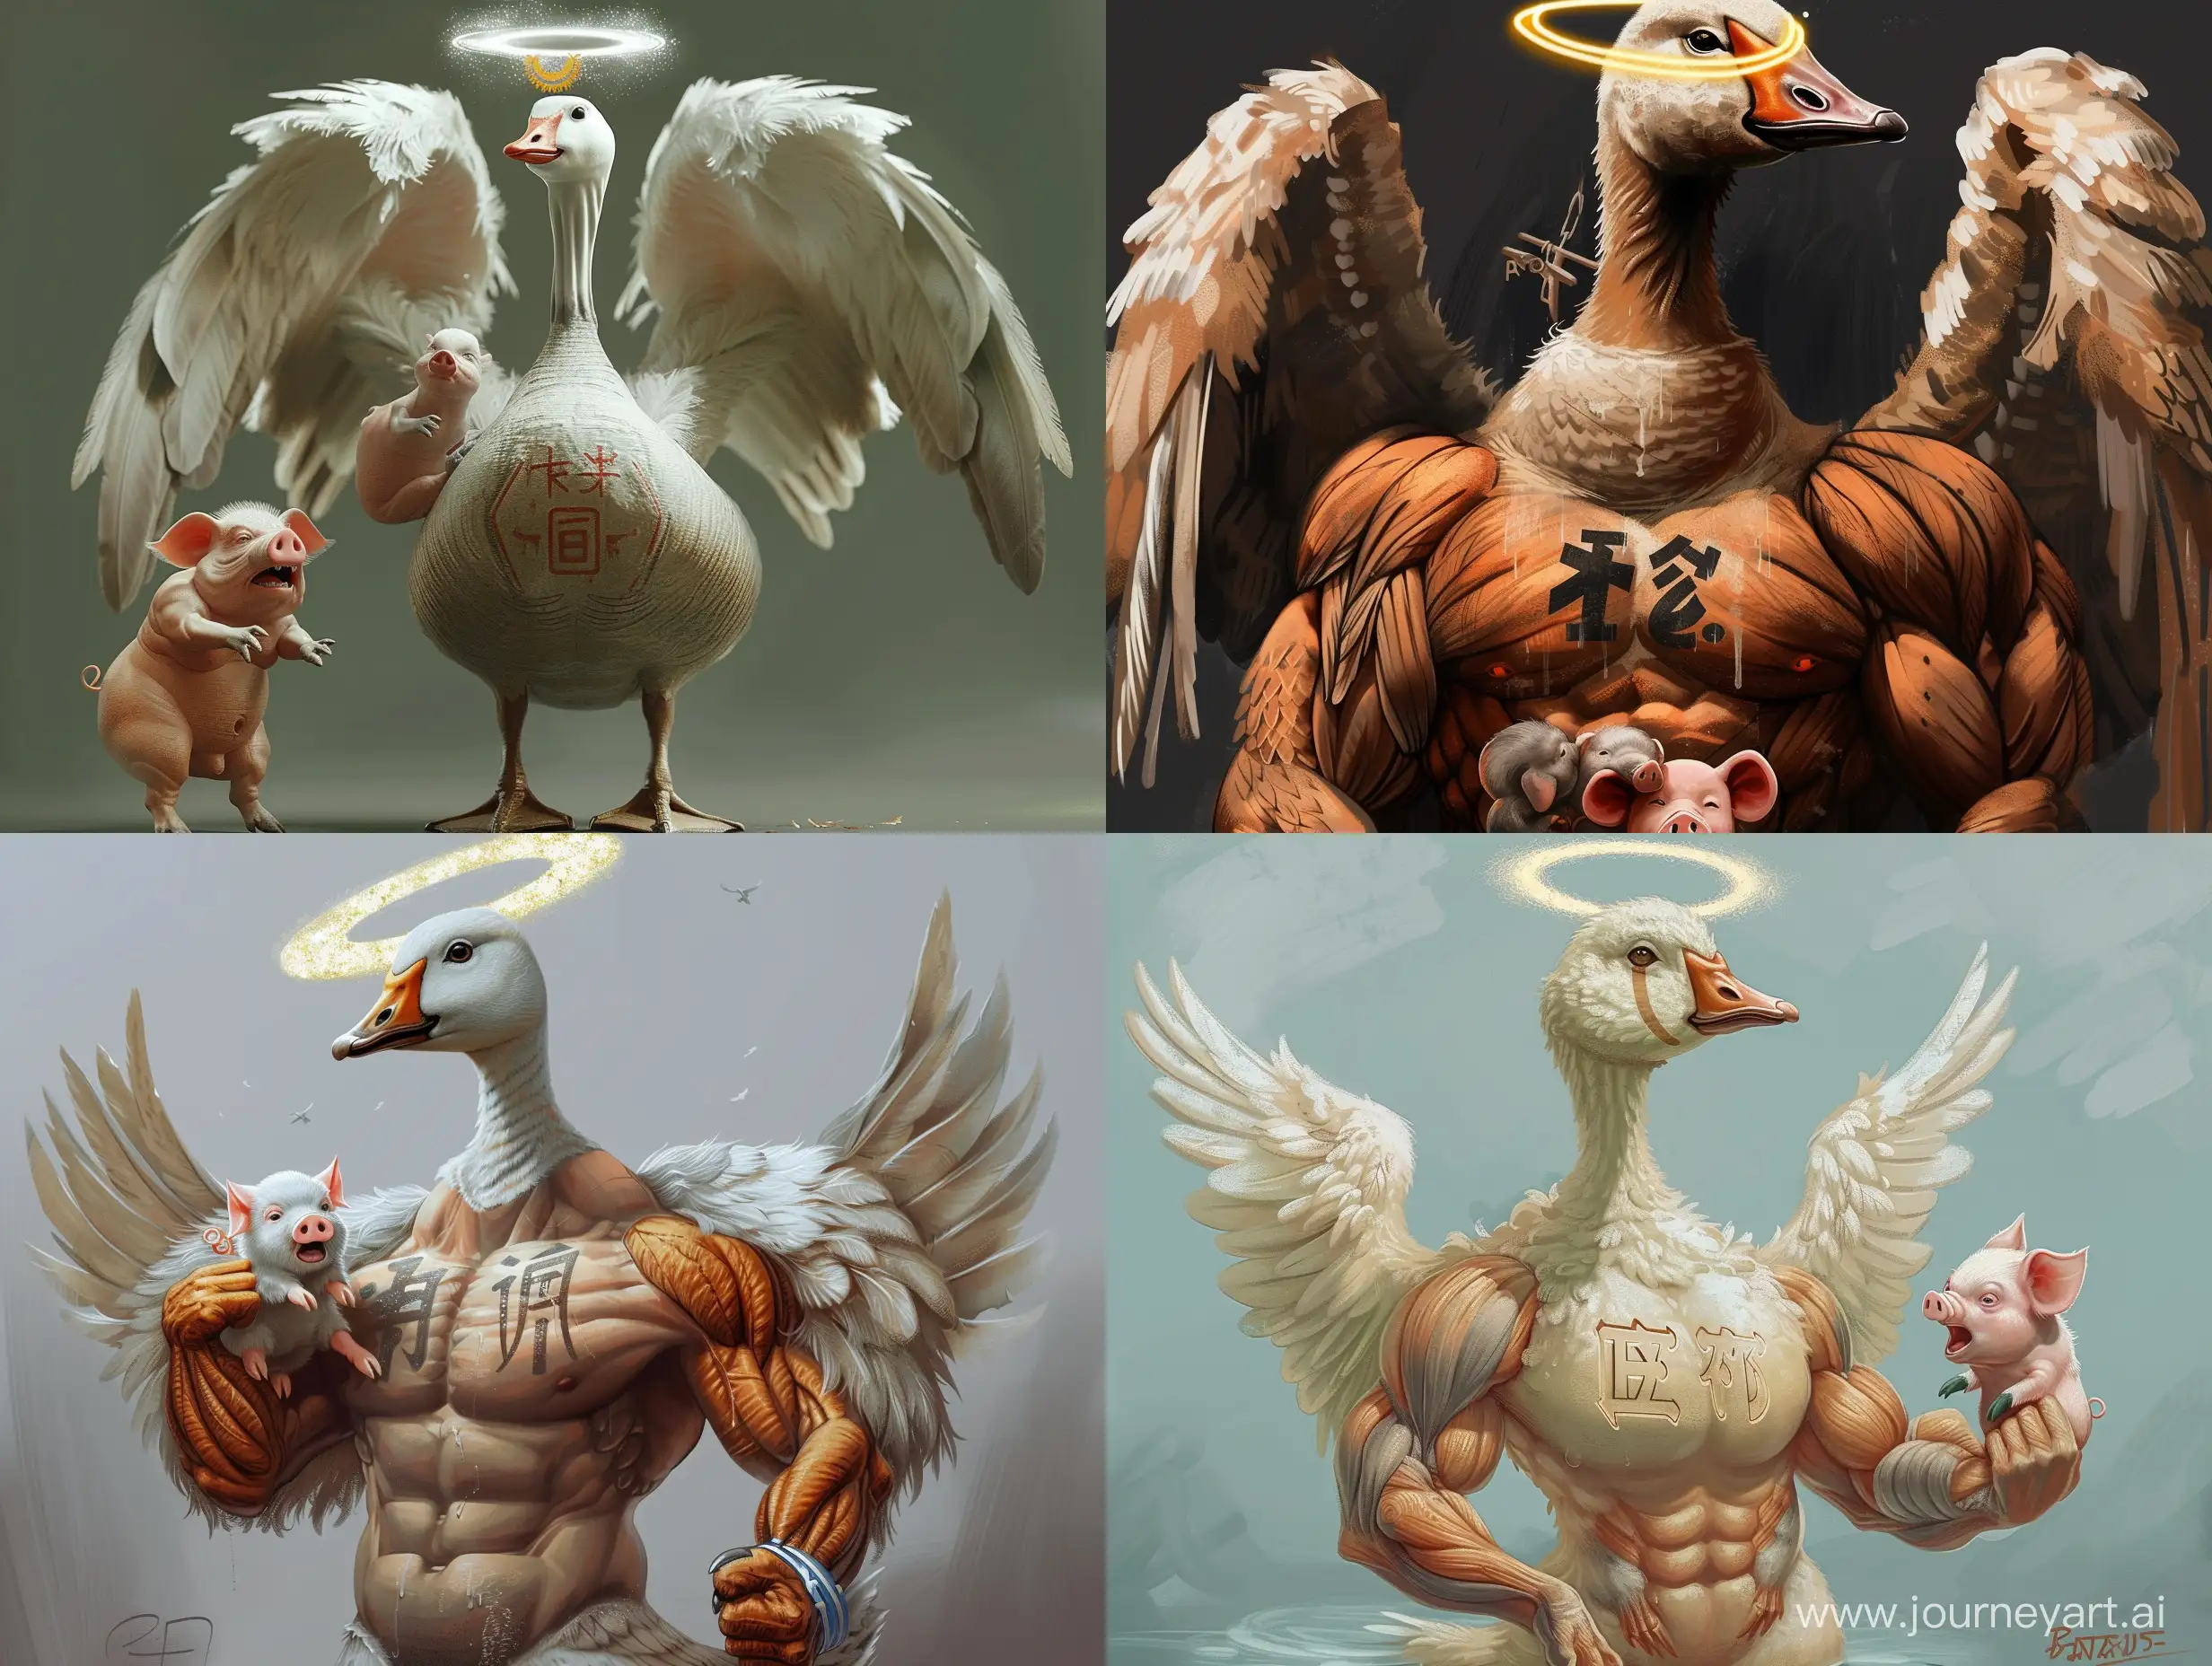 Muscular-Goose-with-Halo-Holding-Crying-Mini-Pig